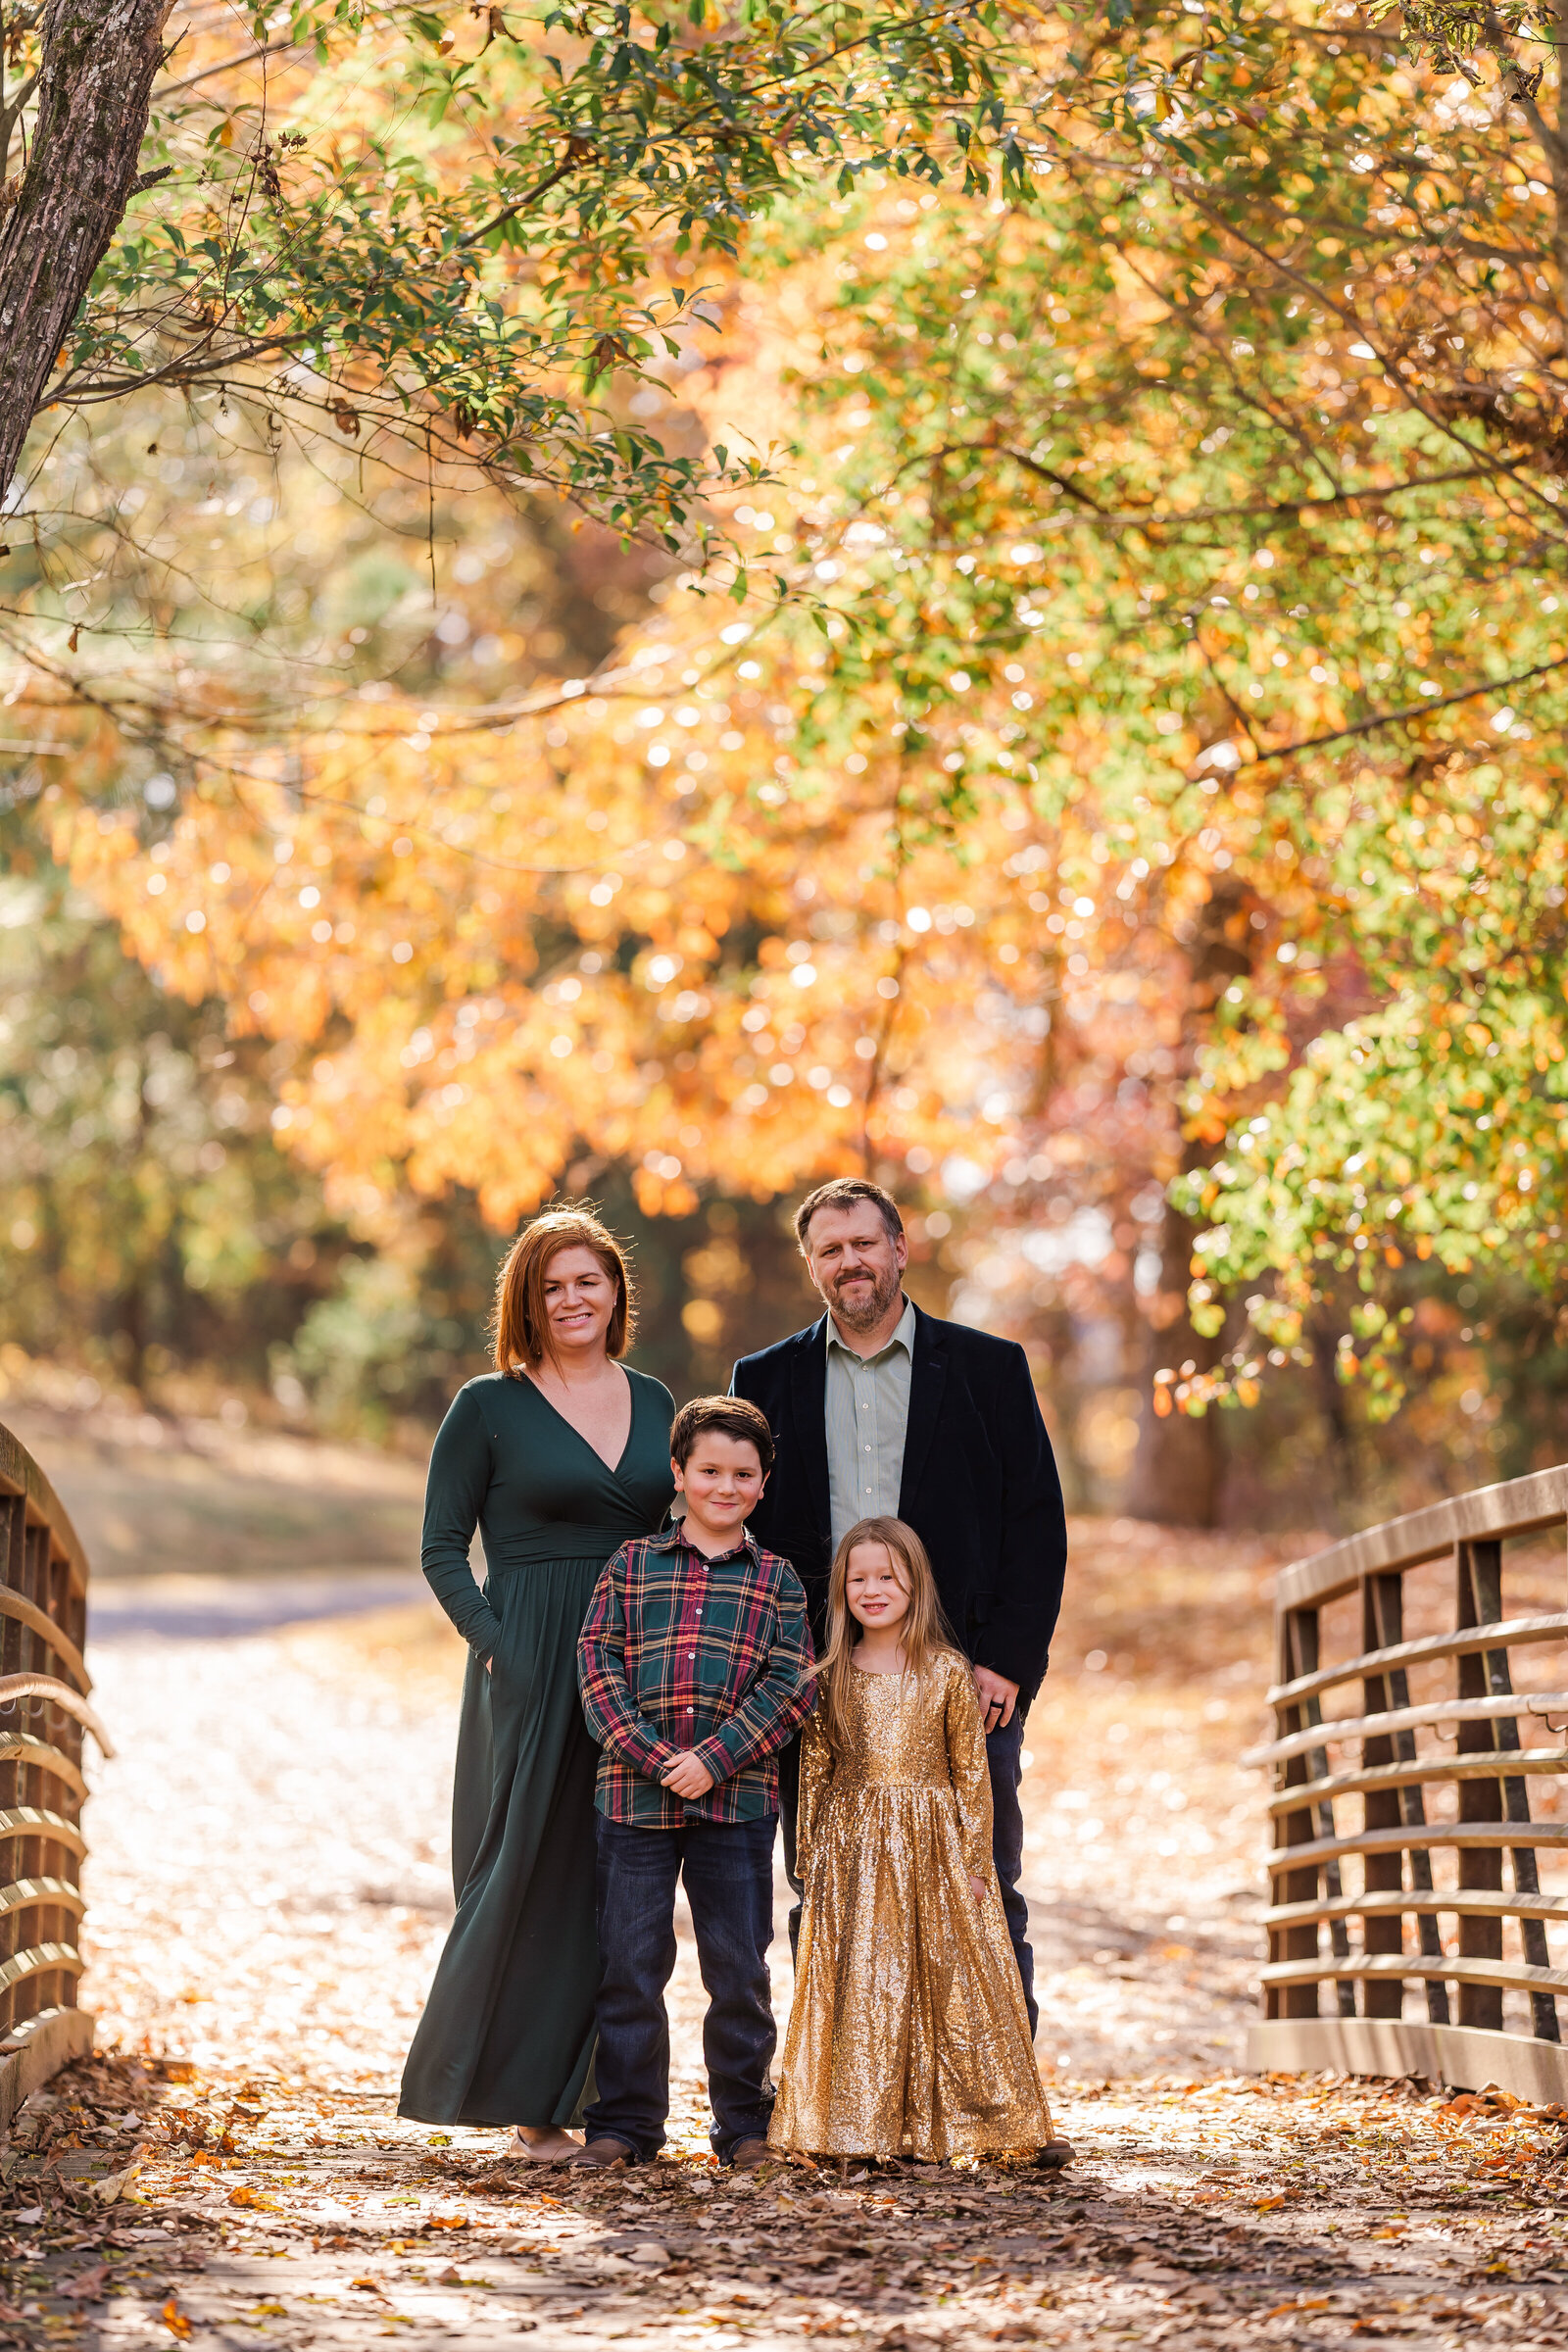 Family poses for fall photo at Greenway Farms